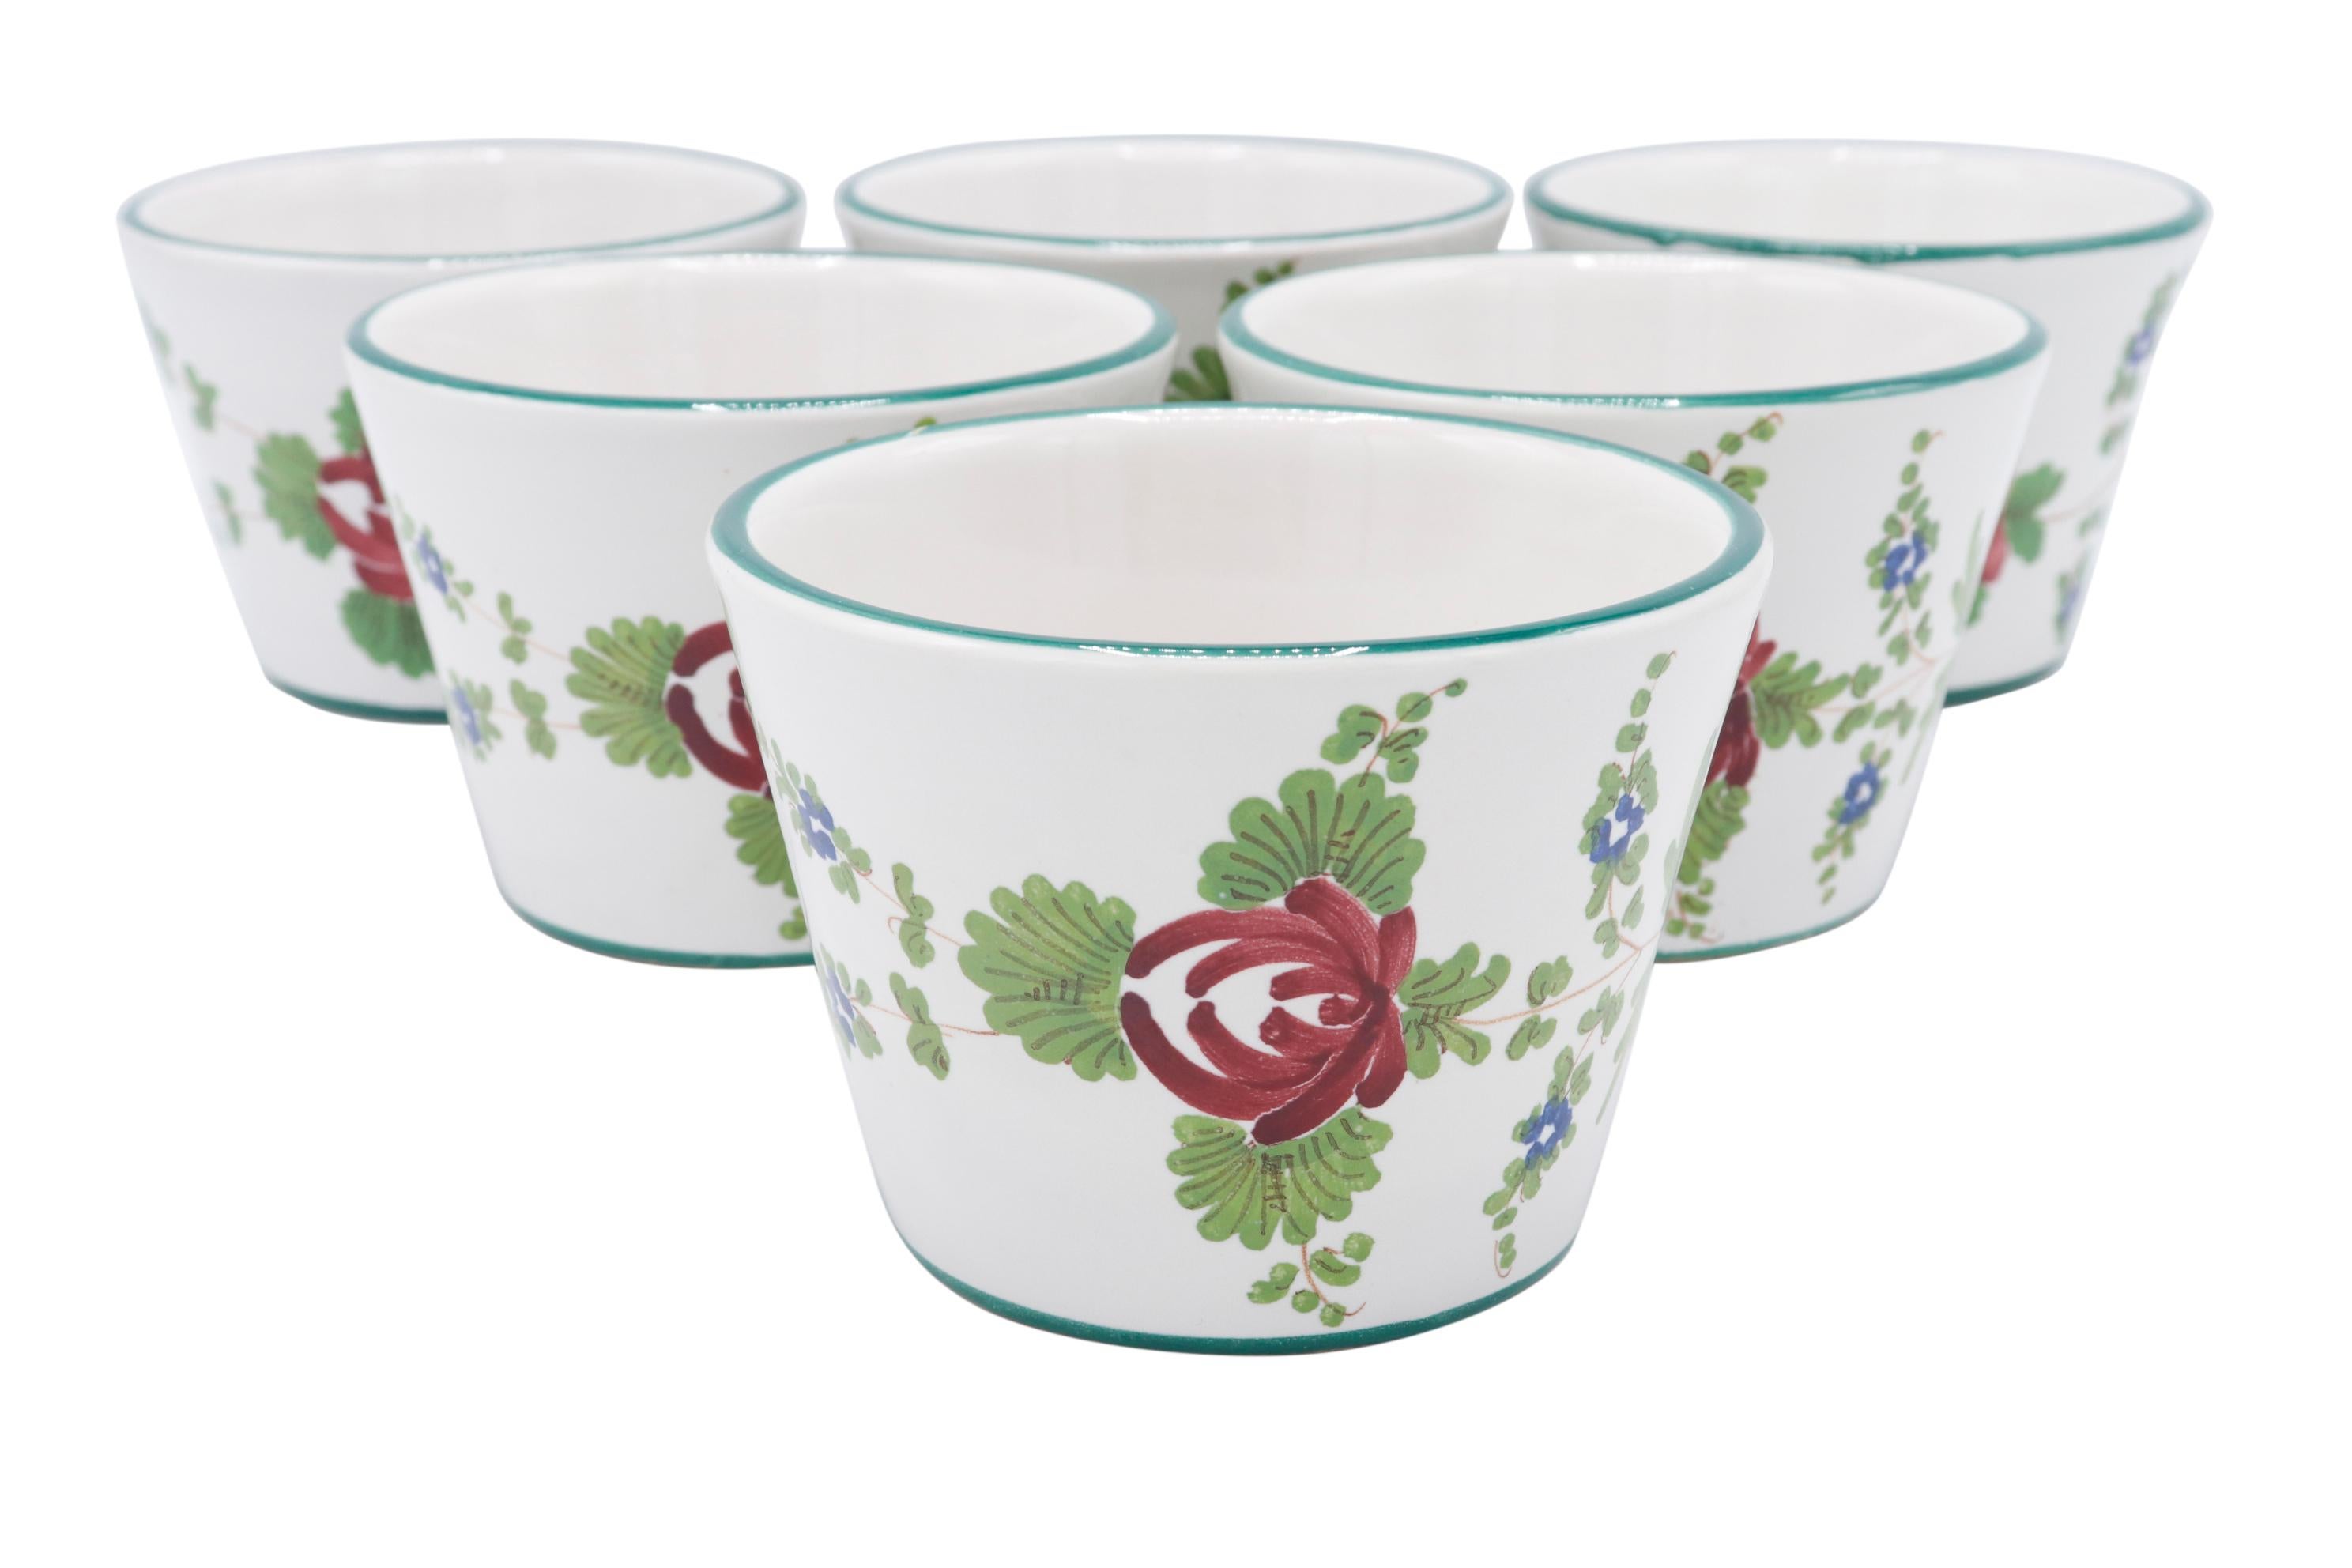 A set of six Italian hand painted cups made by Ceramica Imola, founded in 1874. Decorated with a simple red and blue botanical pattern framed with blue and green lines on a white background. Marked underneath with their bee logo and C. Imola with